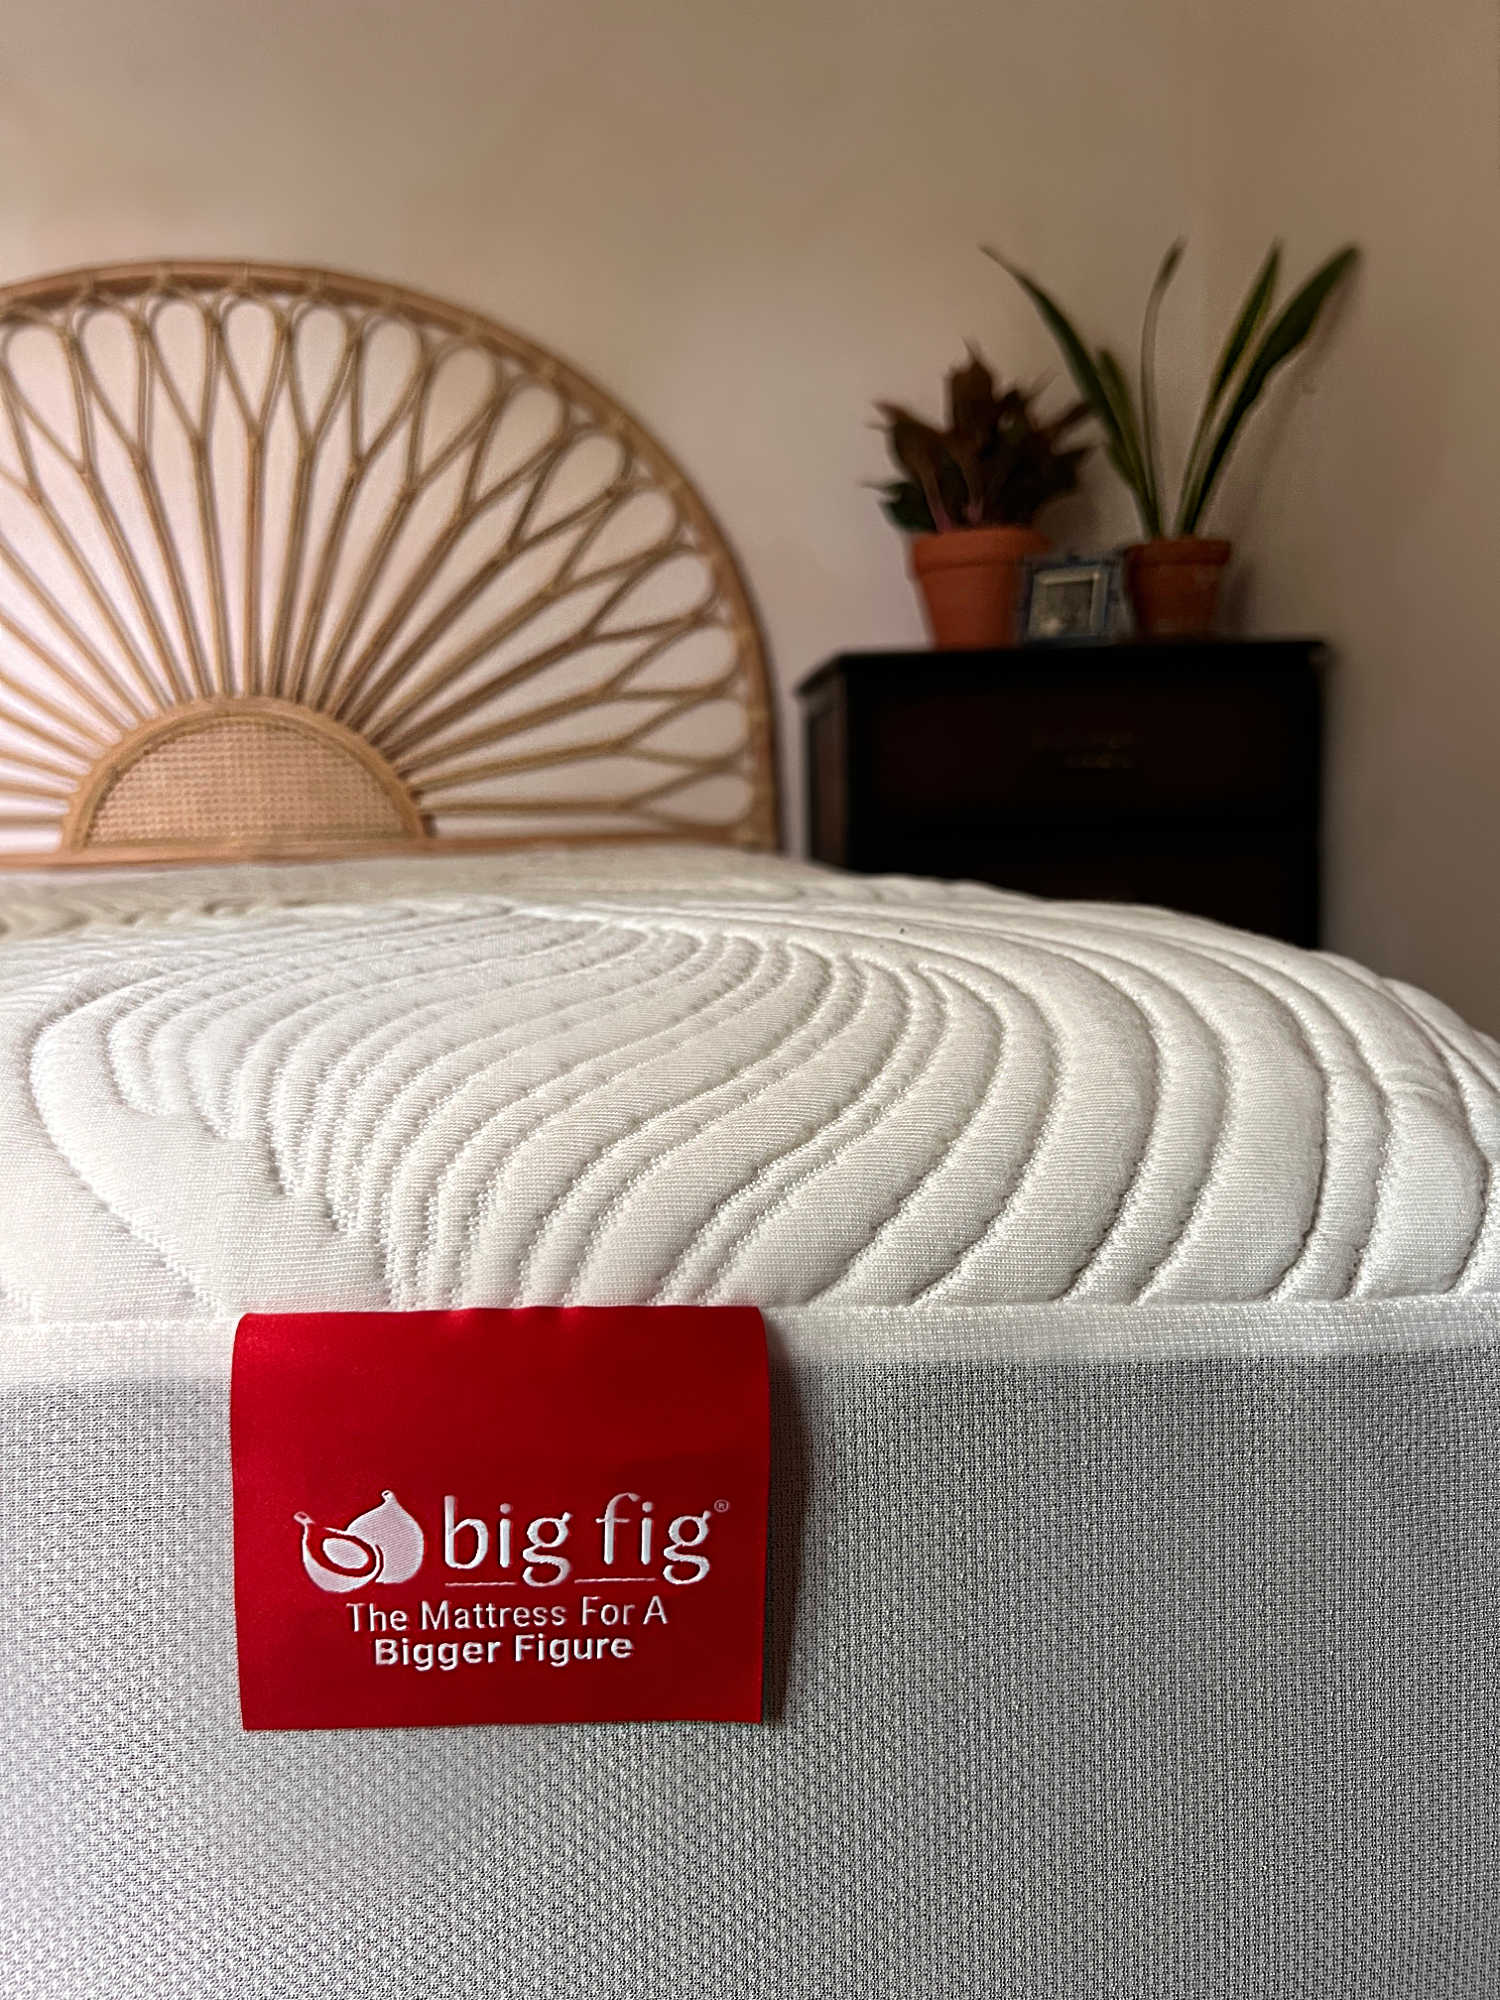 Big Fig mattress system with a rattan sunburst style headboard and a dark wood nightstand holding two potted plants and a framed black and white photo.